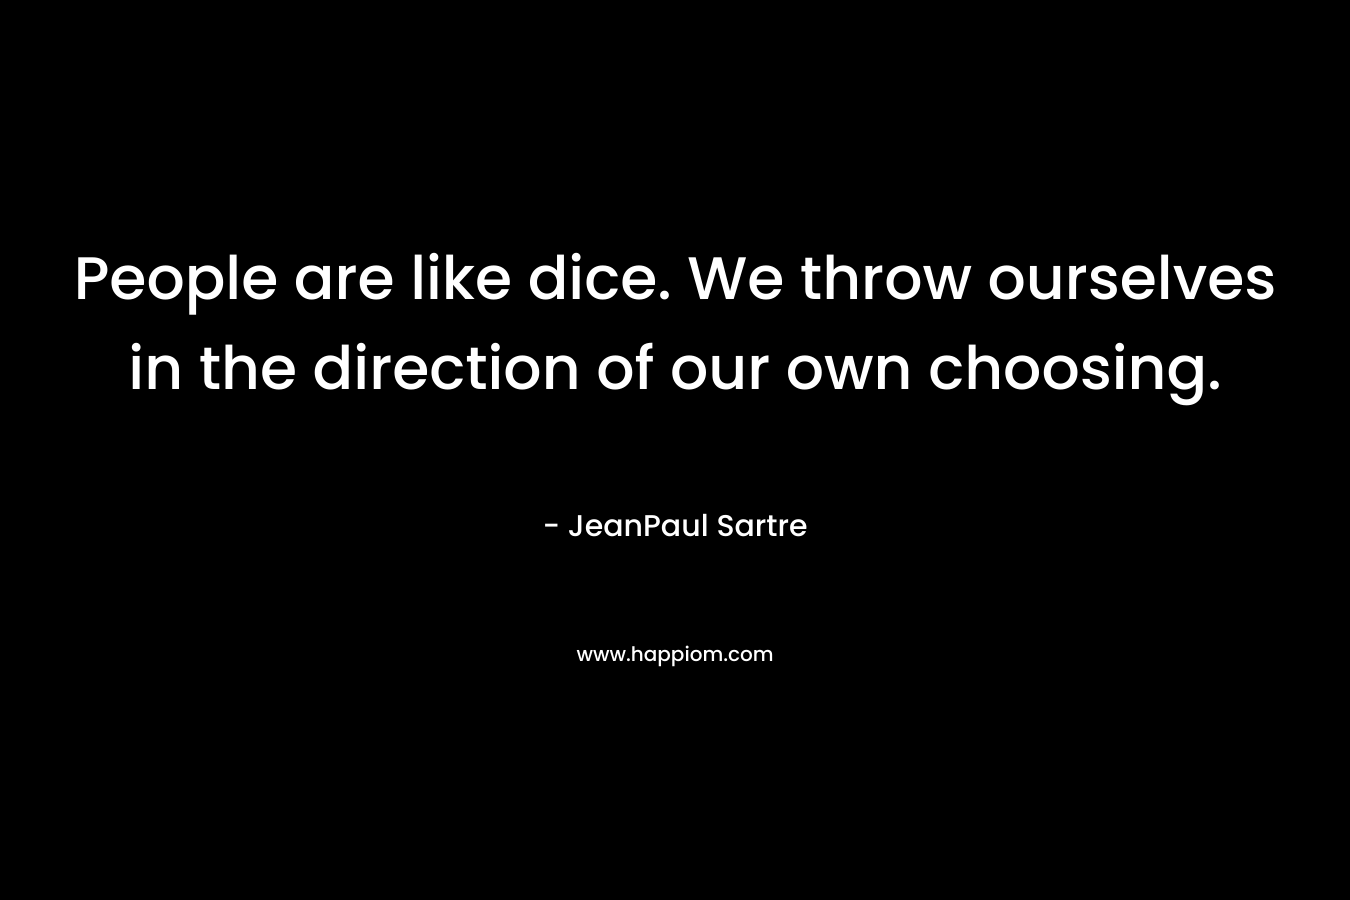 People are like dice. We throw ourselves in the direction of our own choosing.